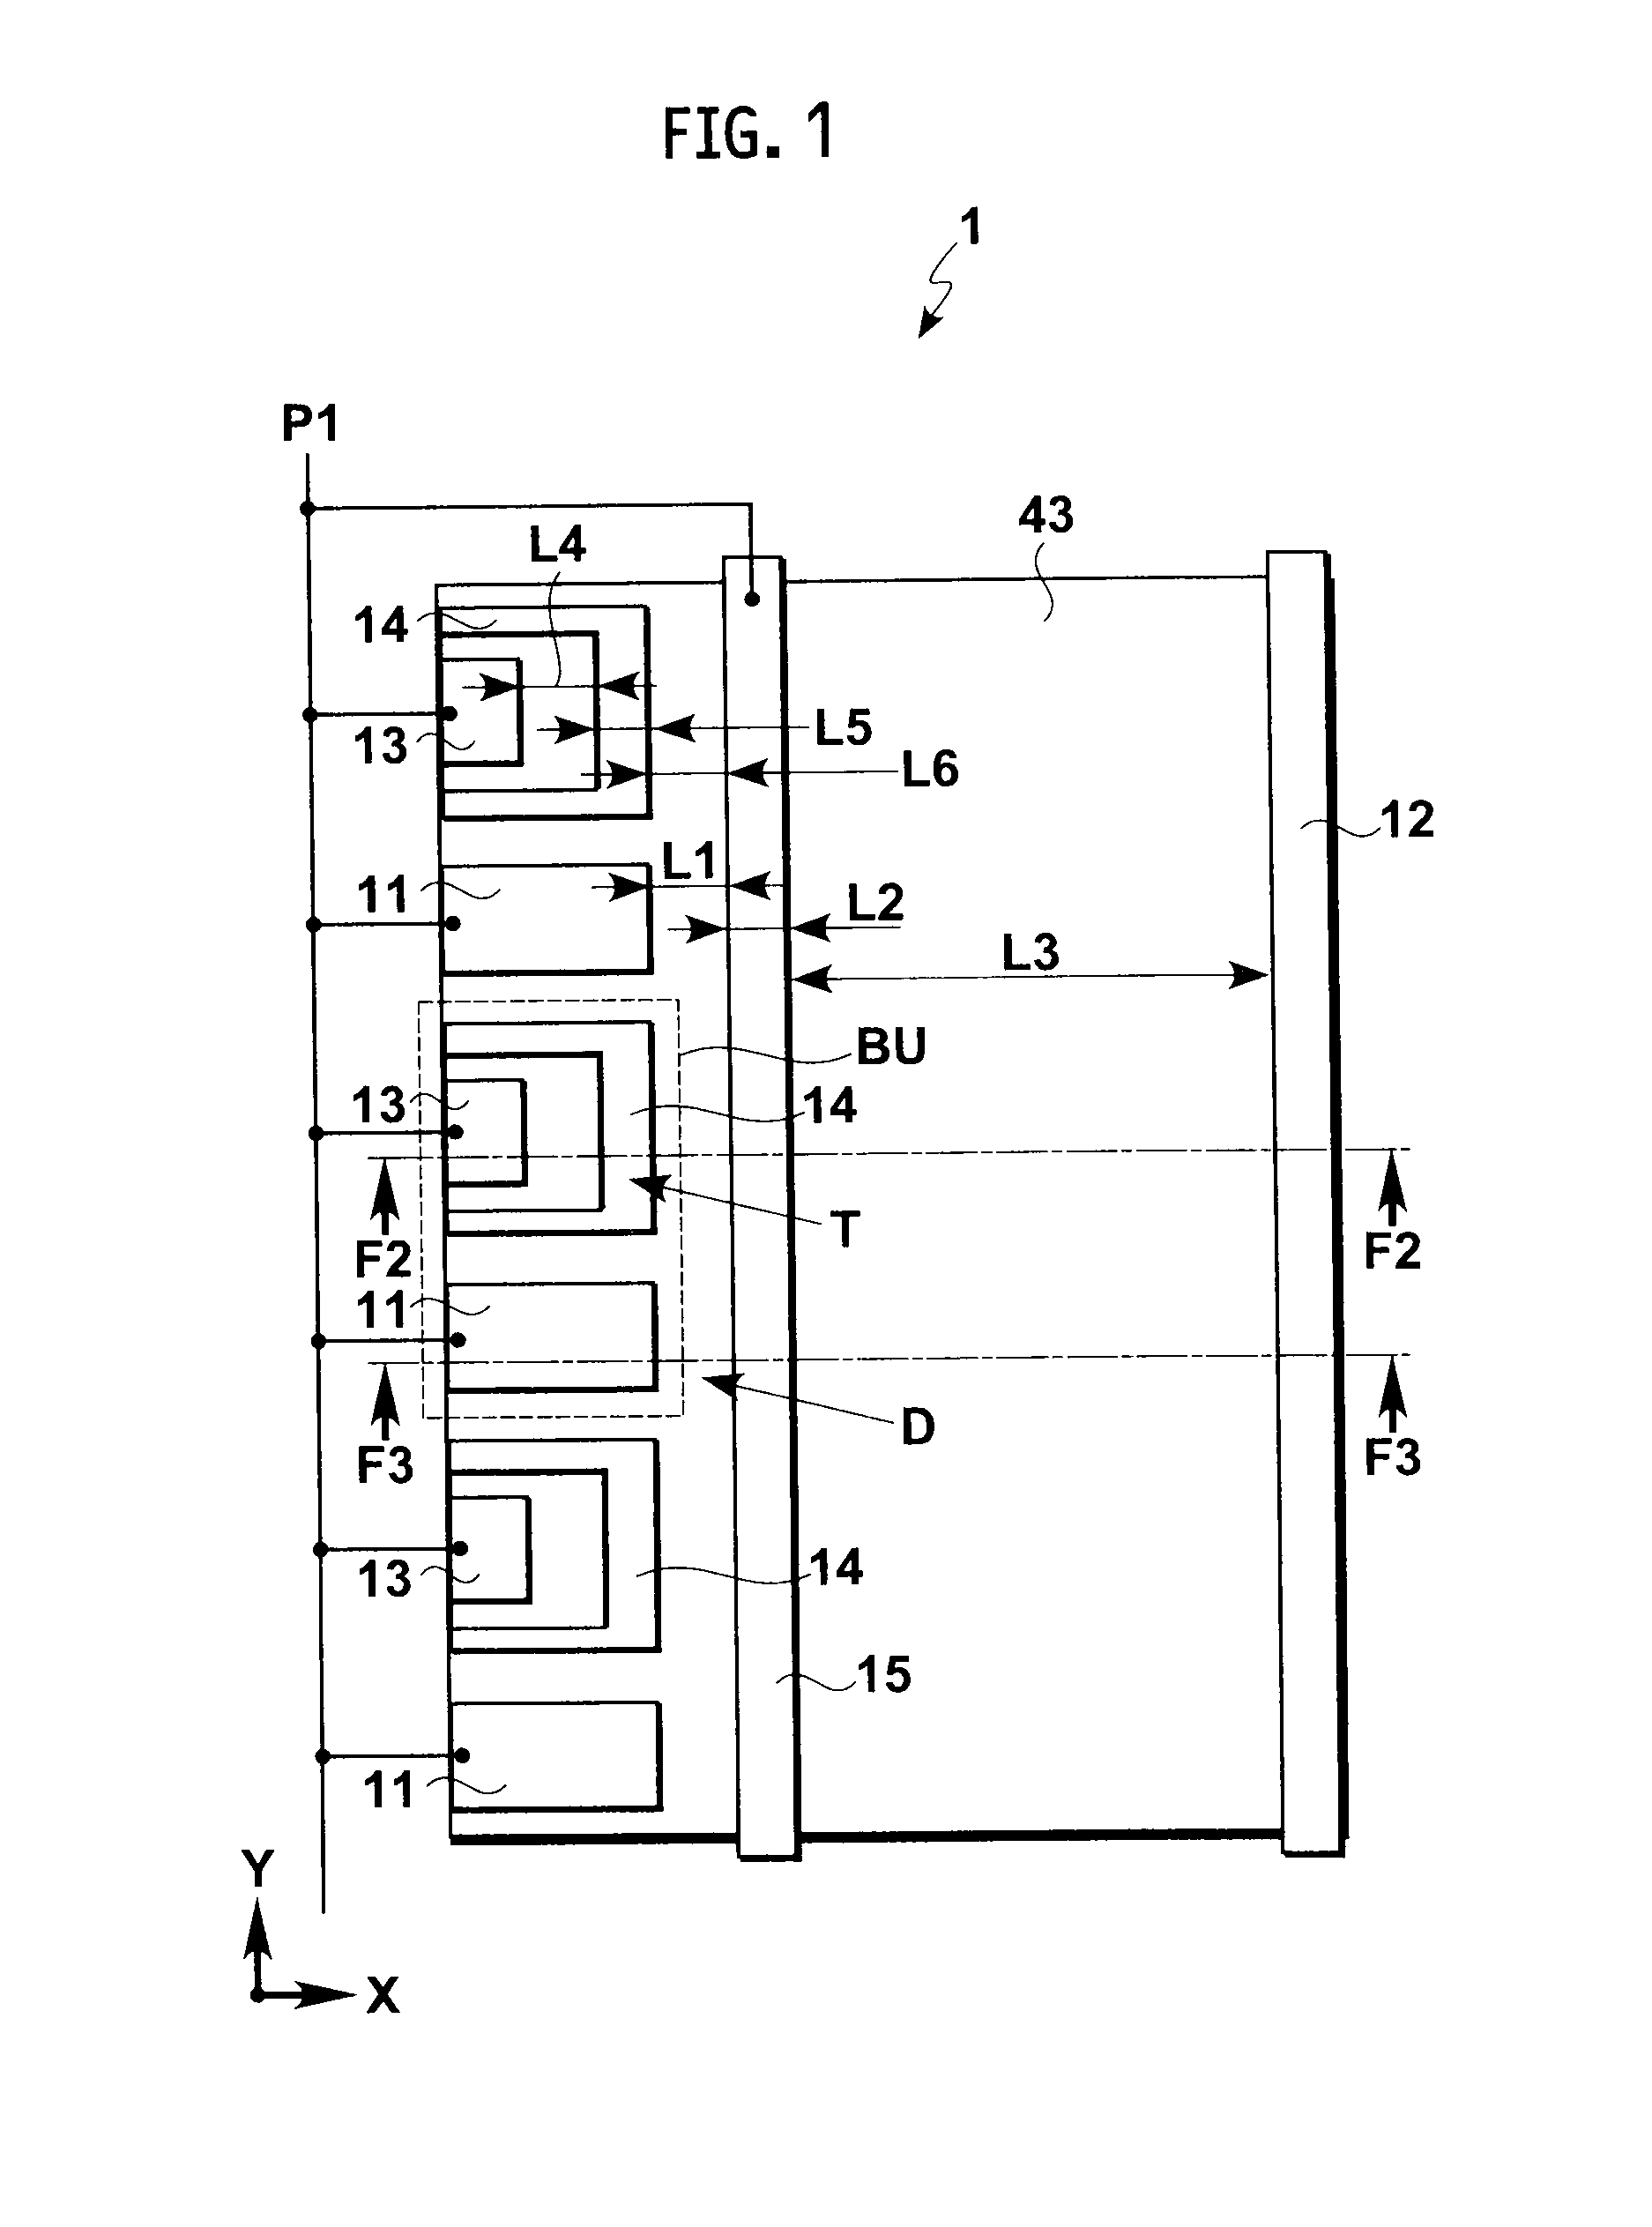 Semiconductor device having transistor and rectifier